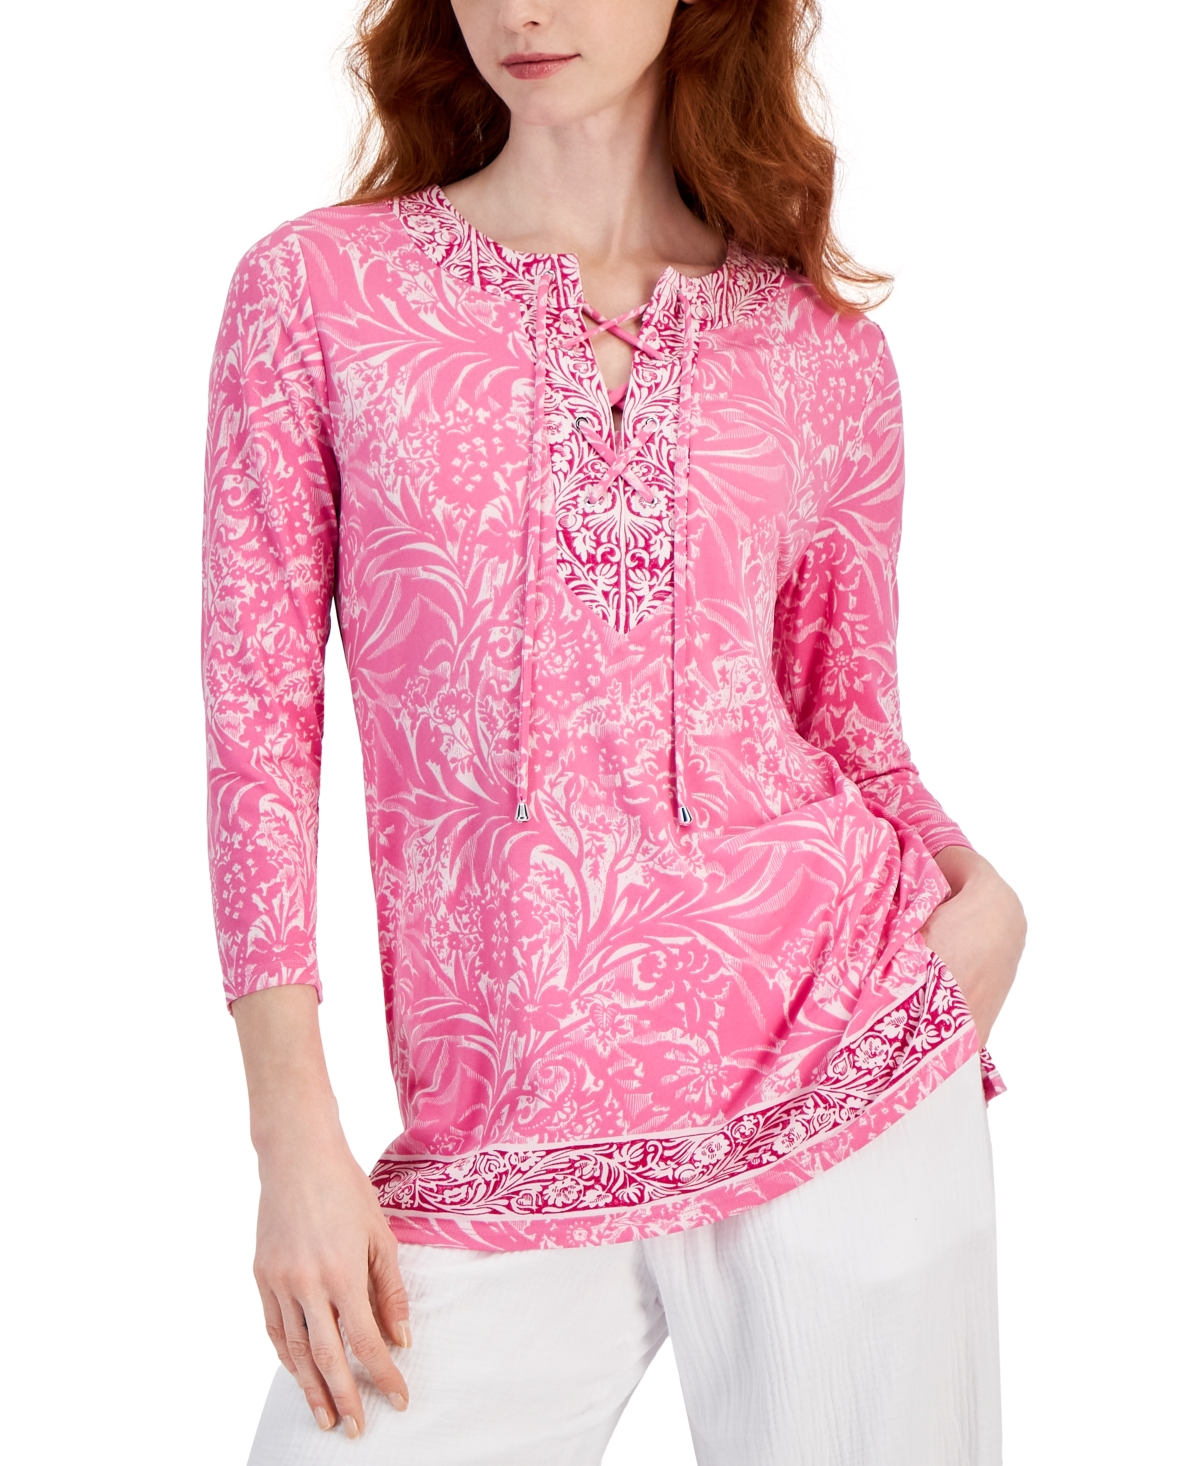 Women's Printed 3/4 Sleeve Lace-Up Knit Top, Created for Macy's - Intrepid Blue Combo